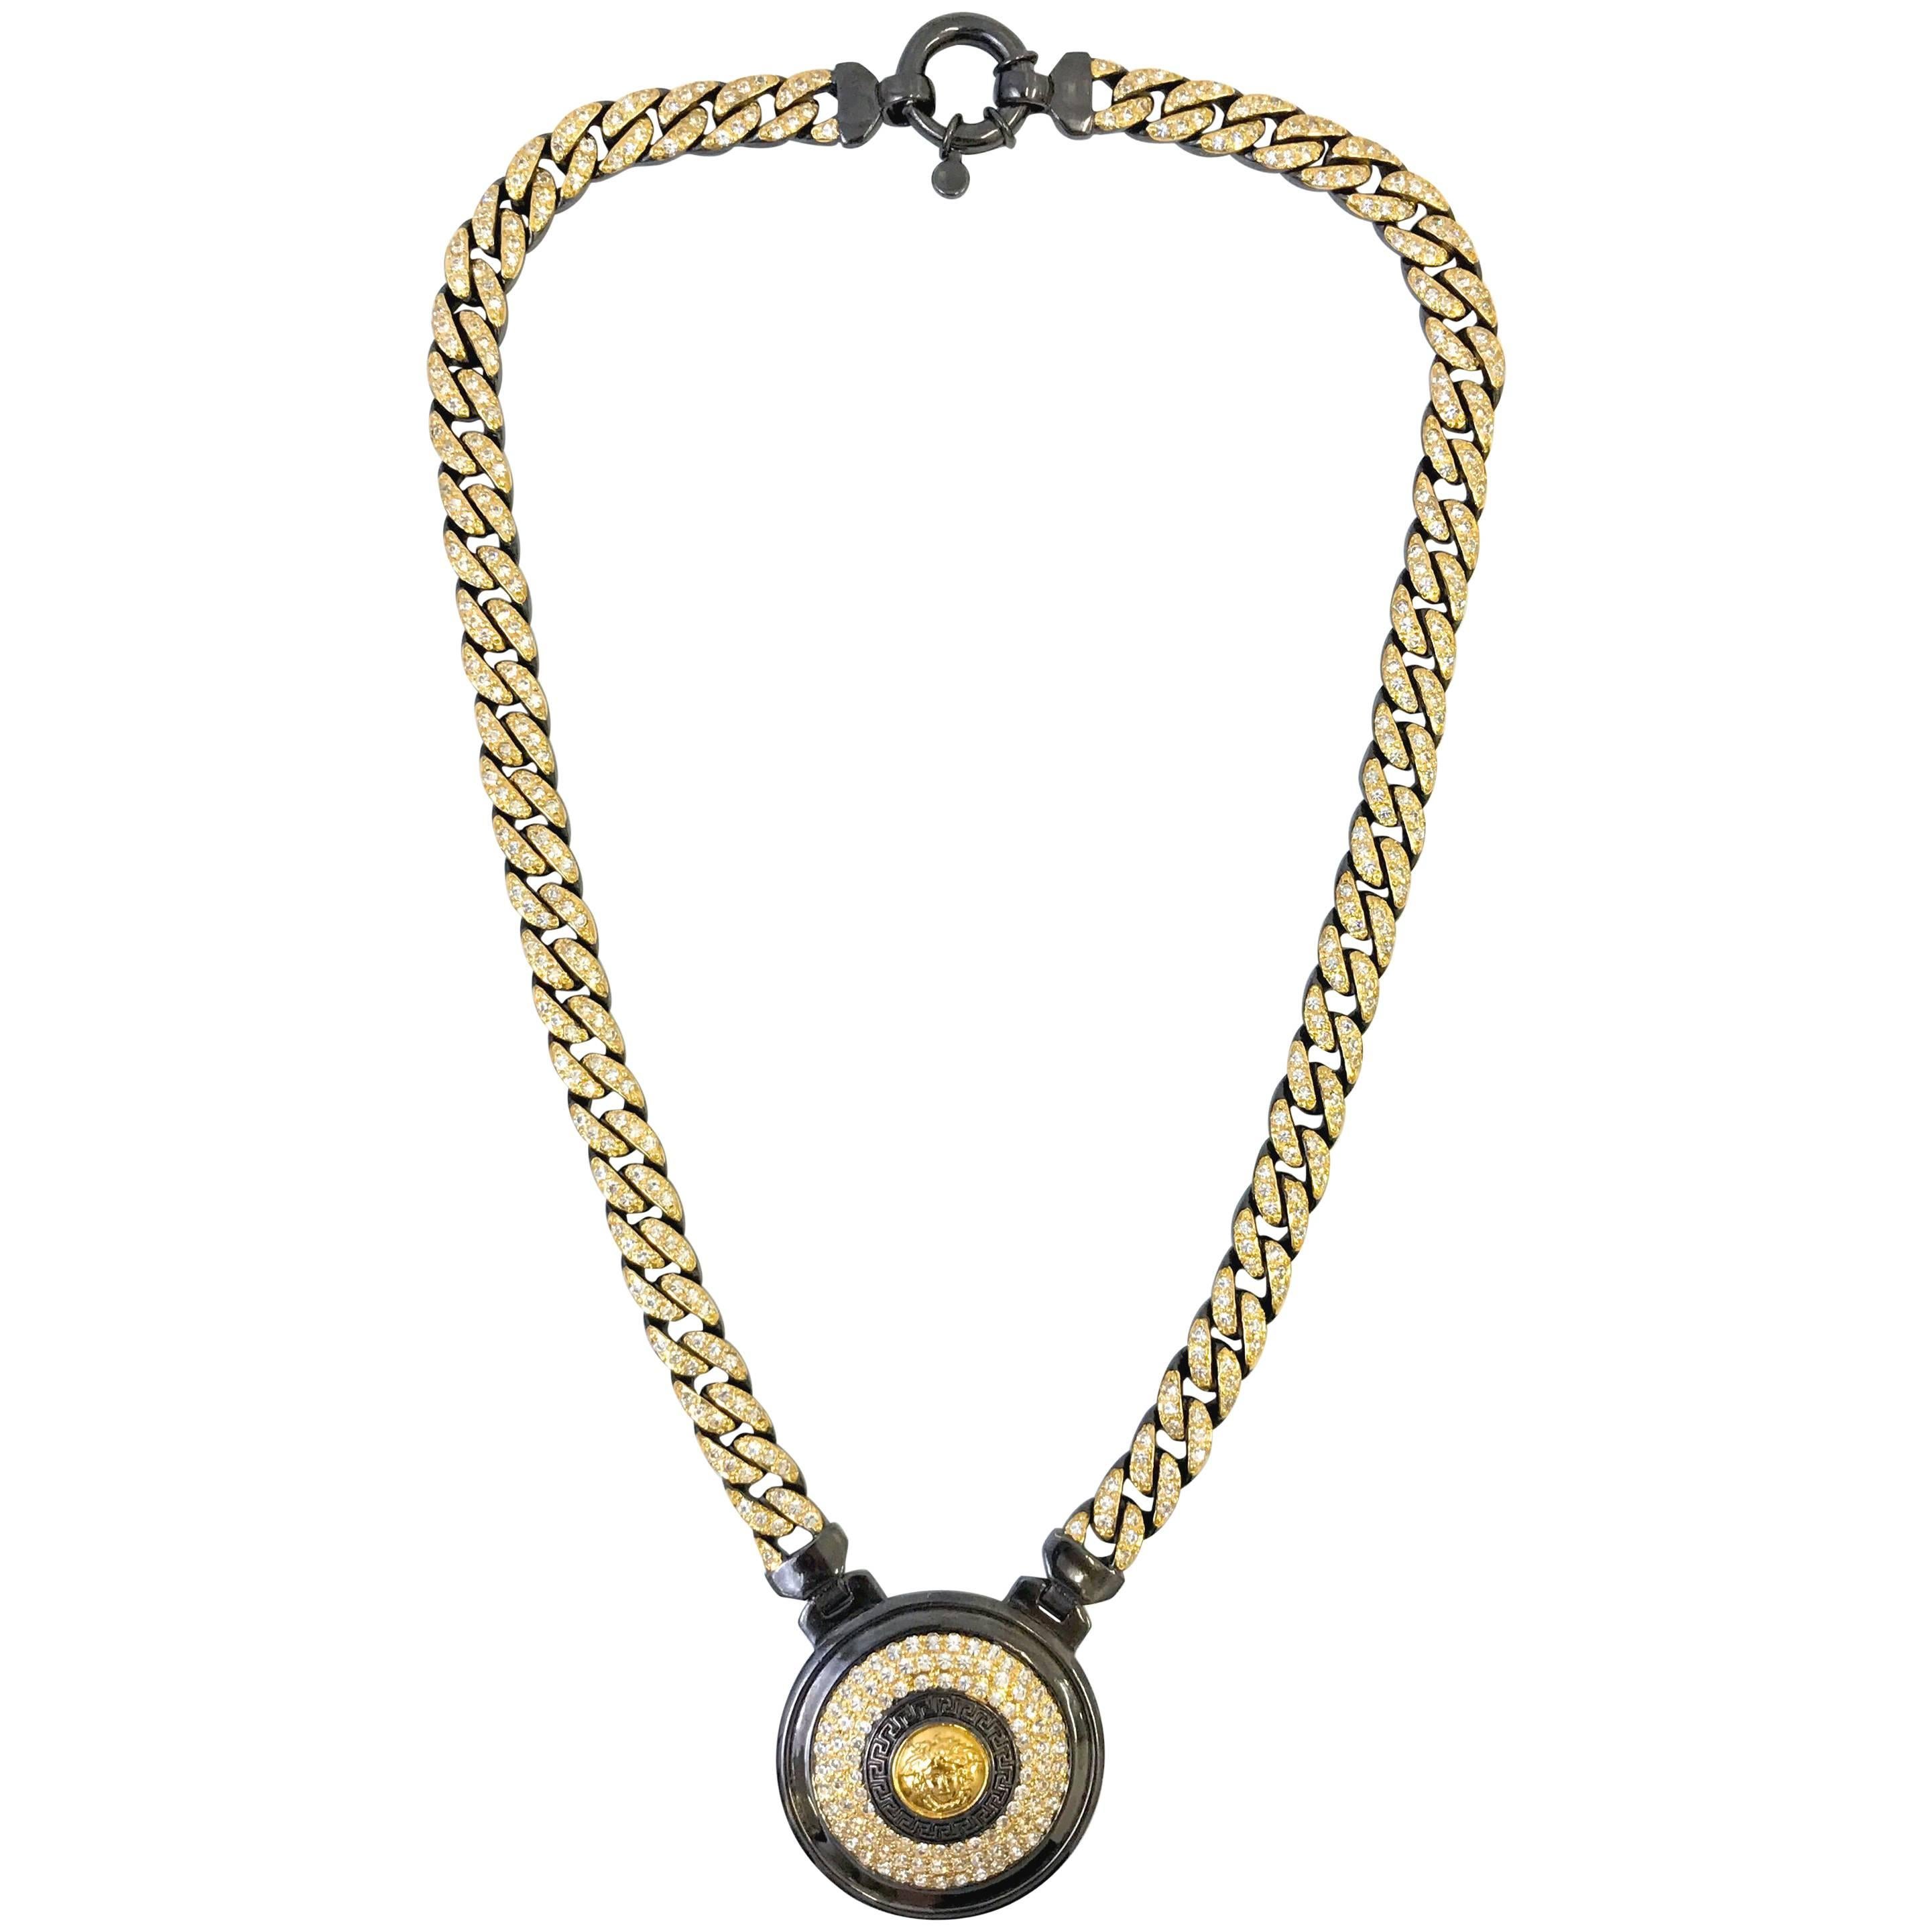 1990s Gianni Versace gunmetal and gold tone medallion chain   For Sale